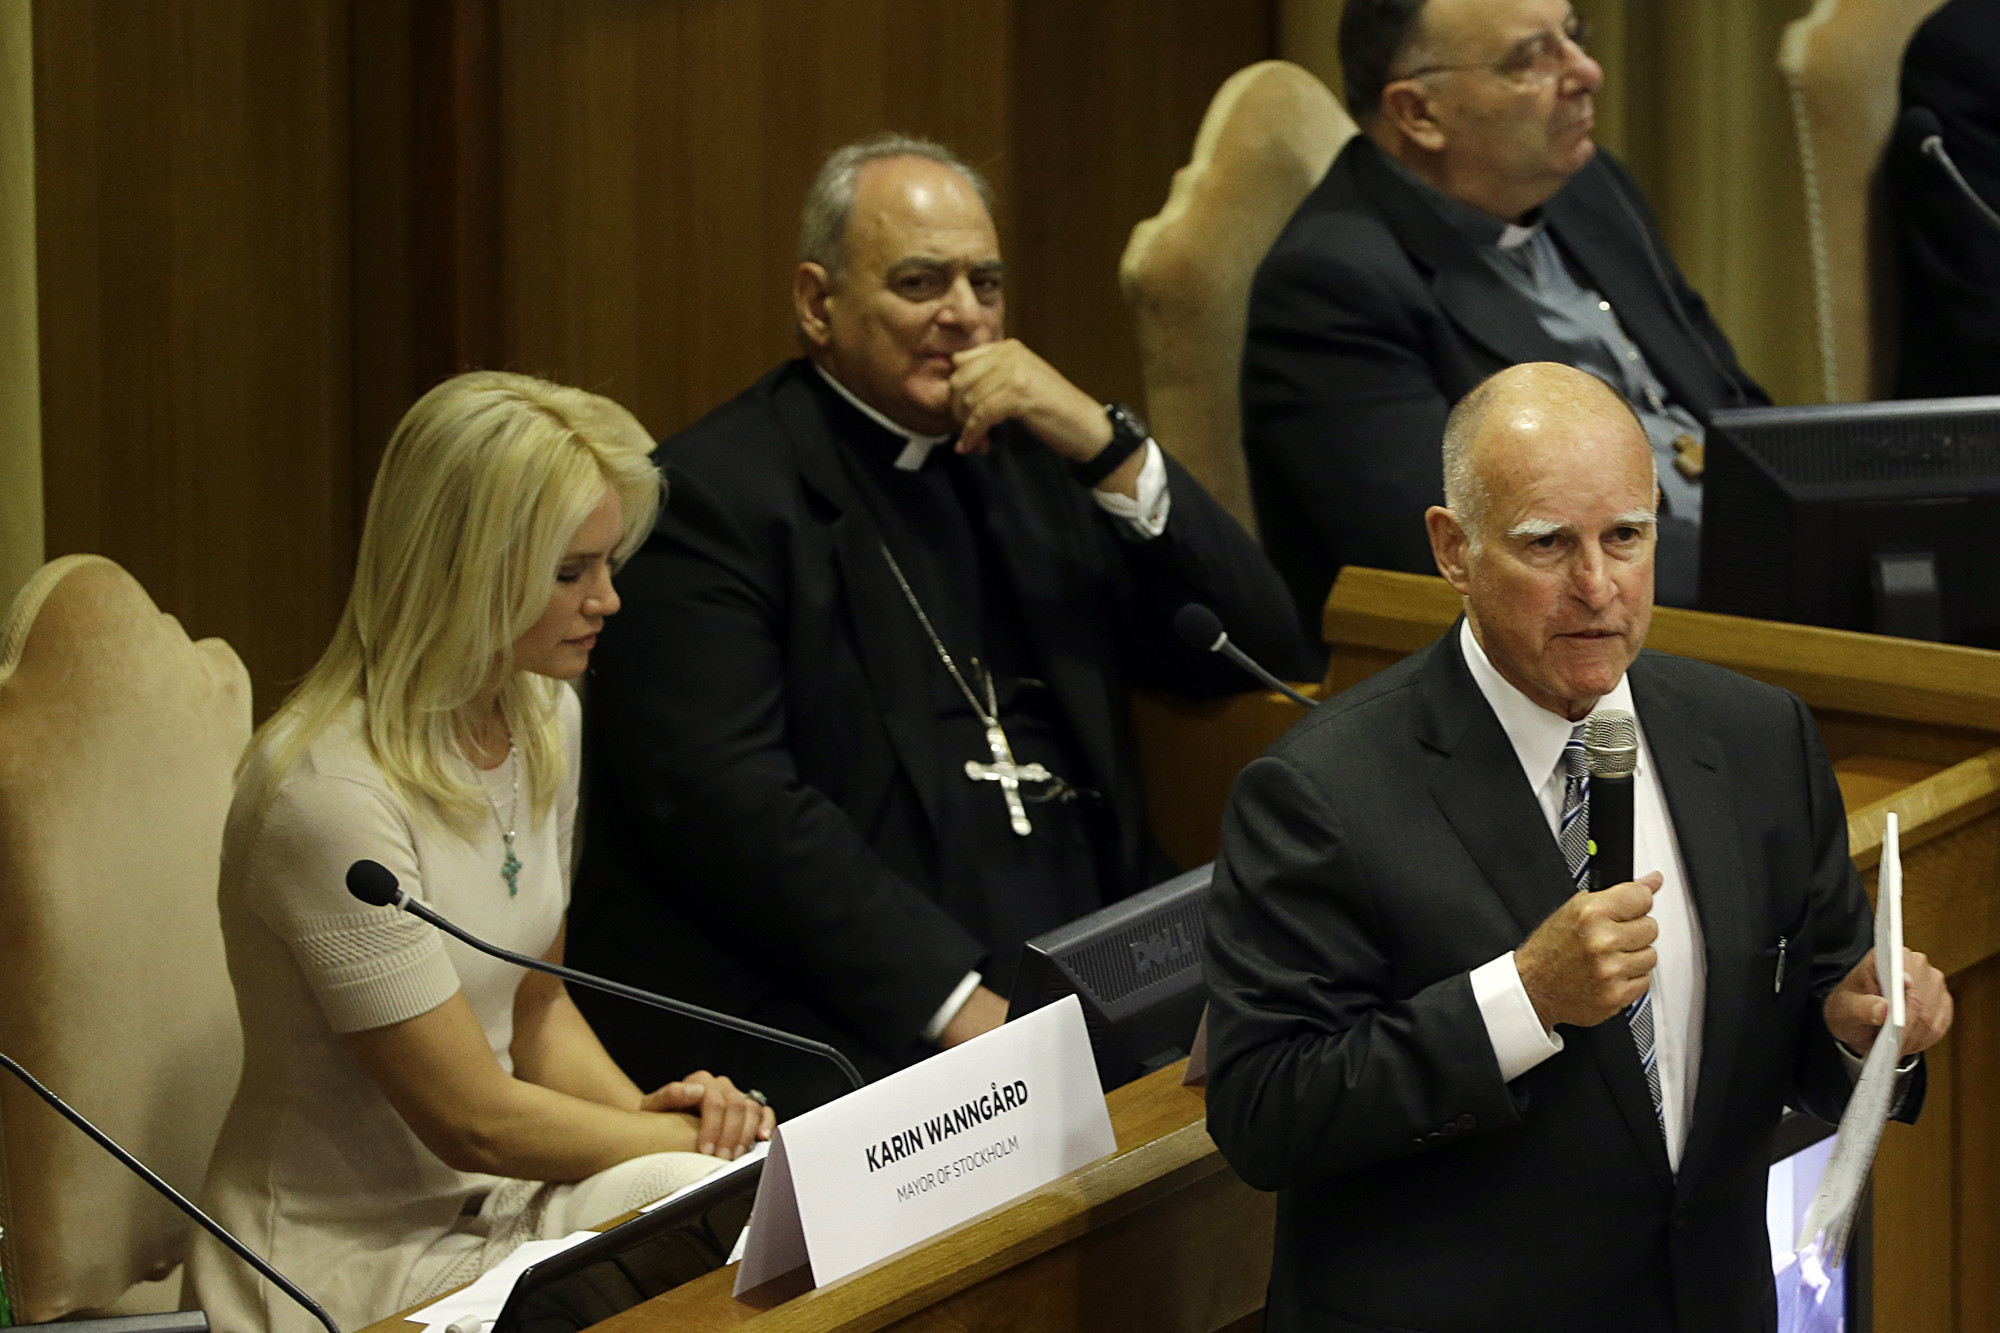 Gov. Jerry Brown speaks at a Vatican conference on climate change in July. (Gregorio Borgia / Associated Press)